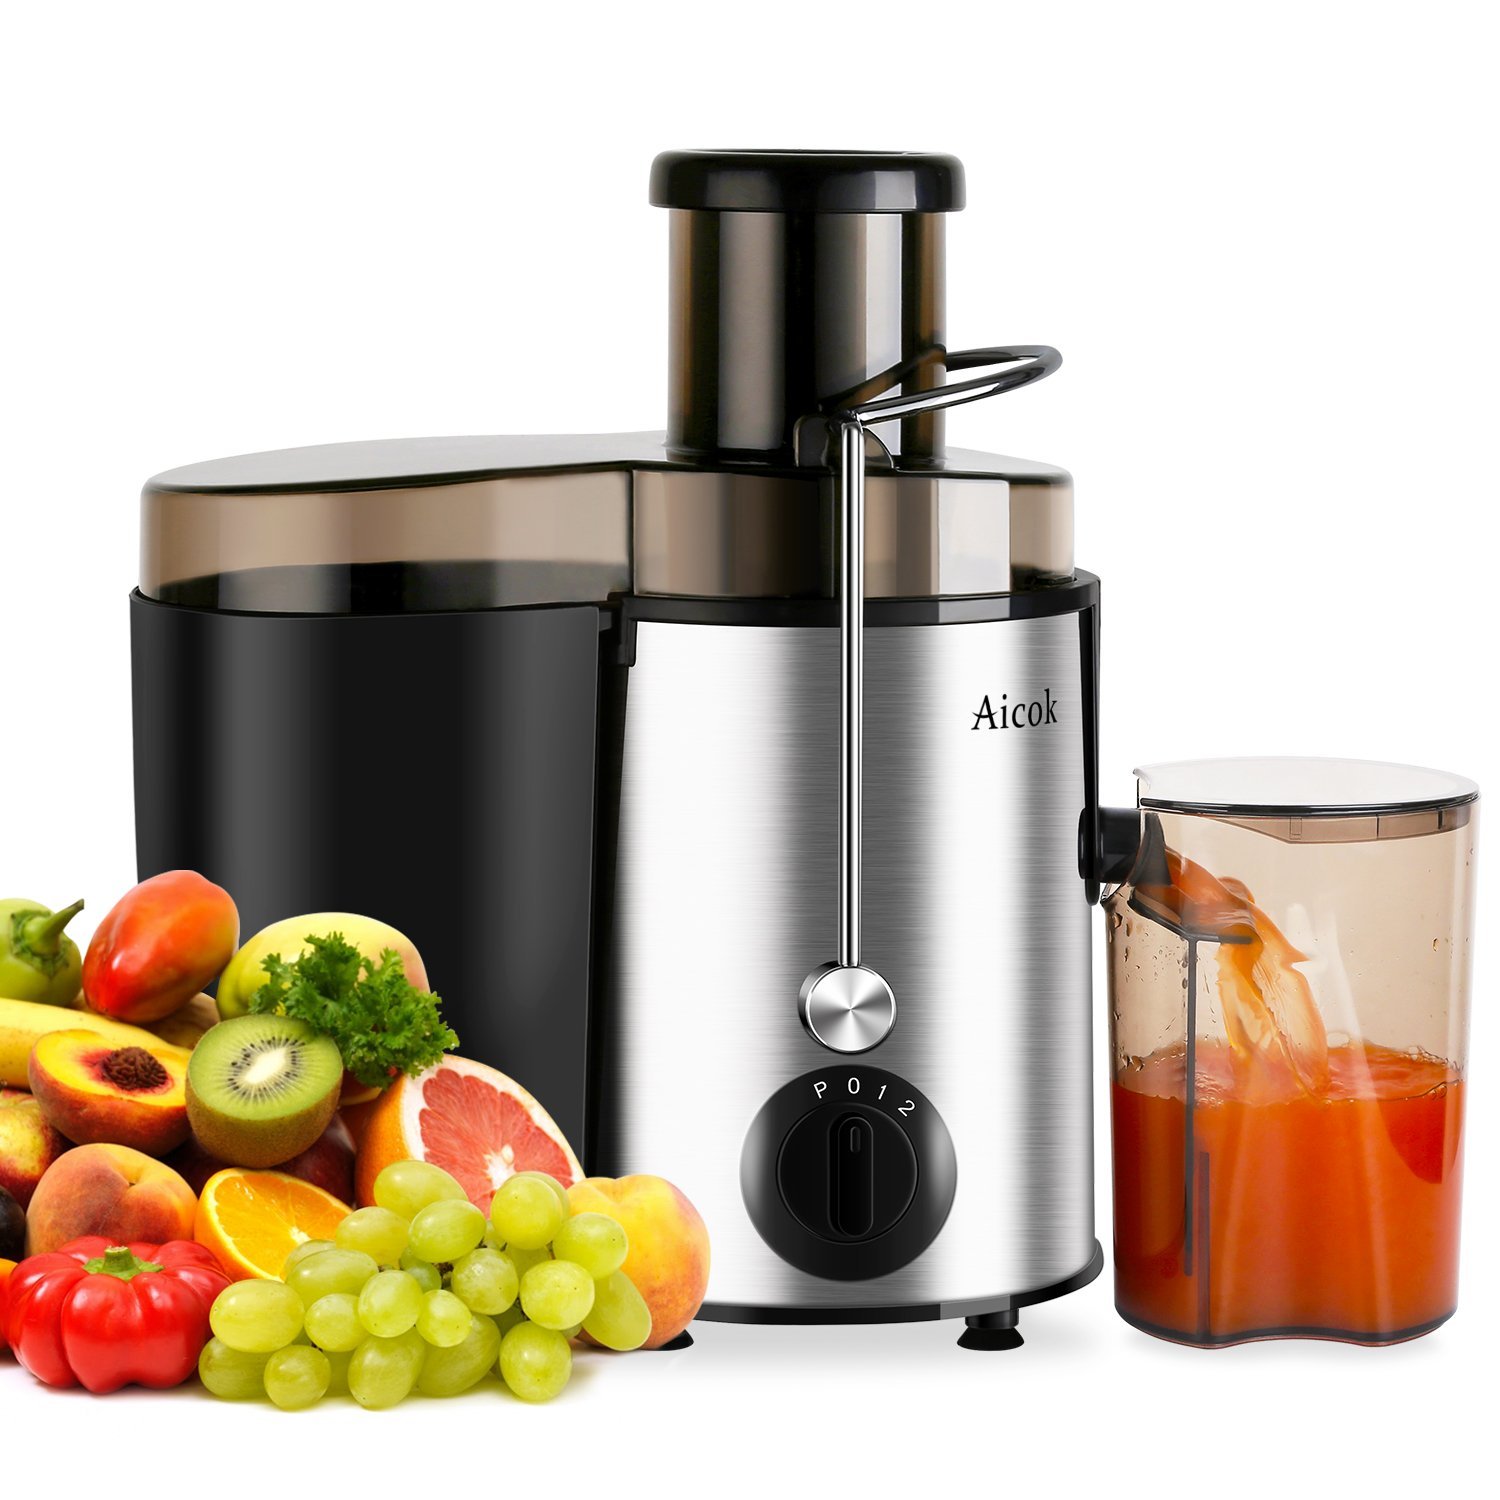 What is a Juicer machine?